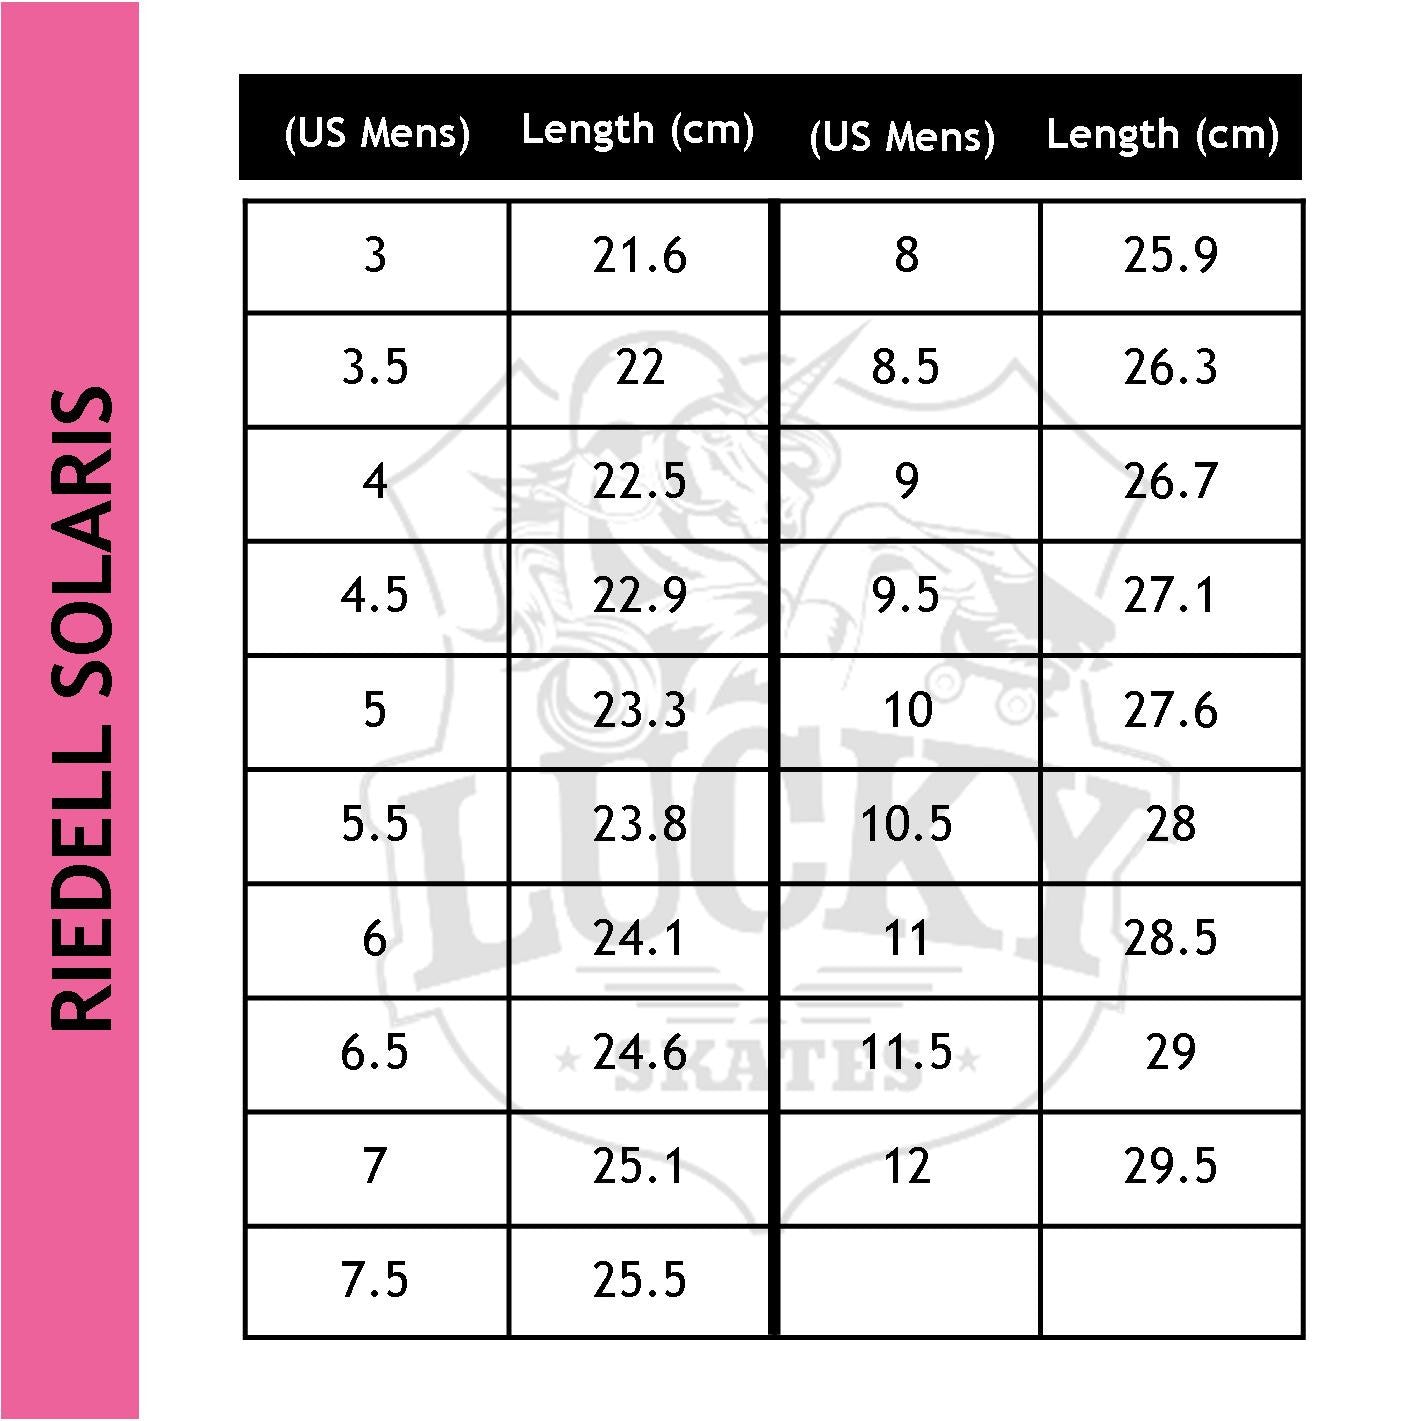 Riedell Size Chart